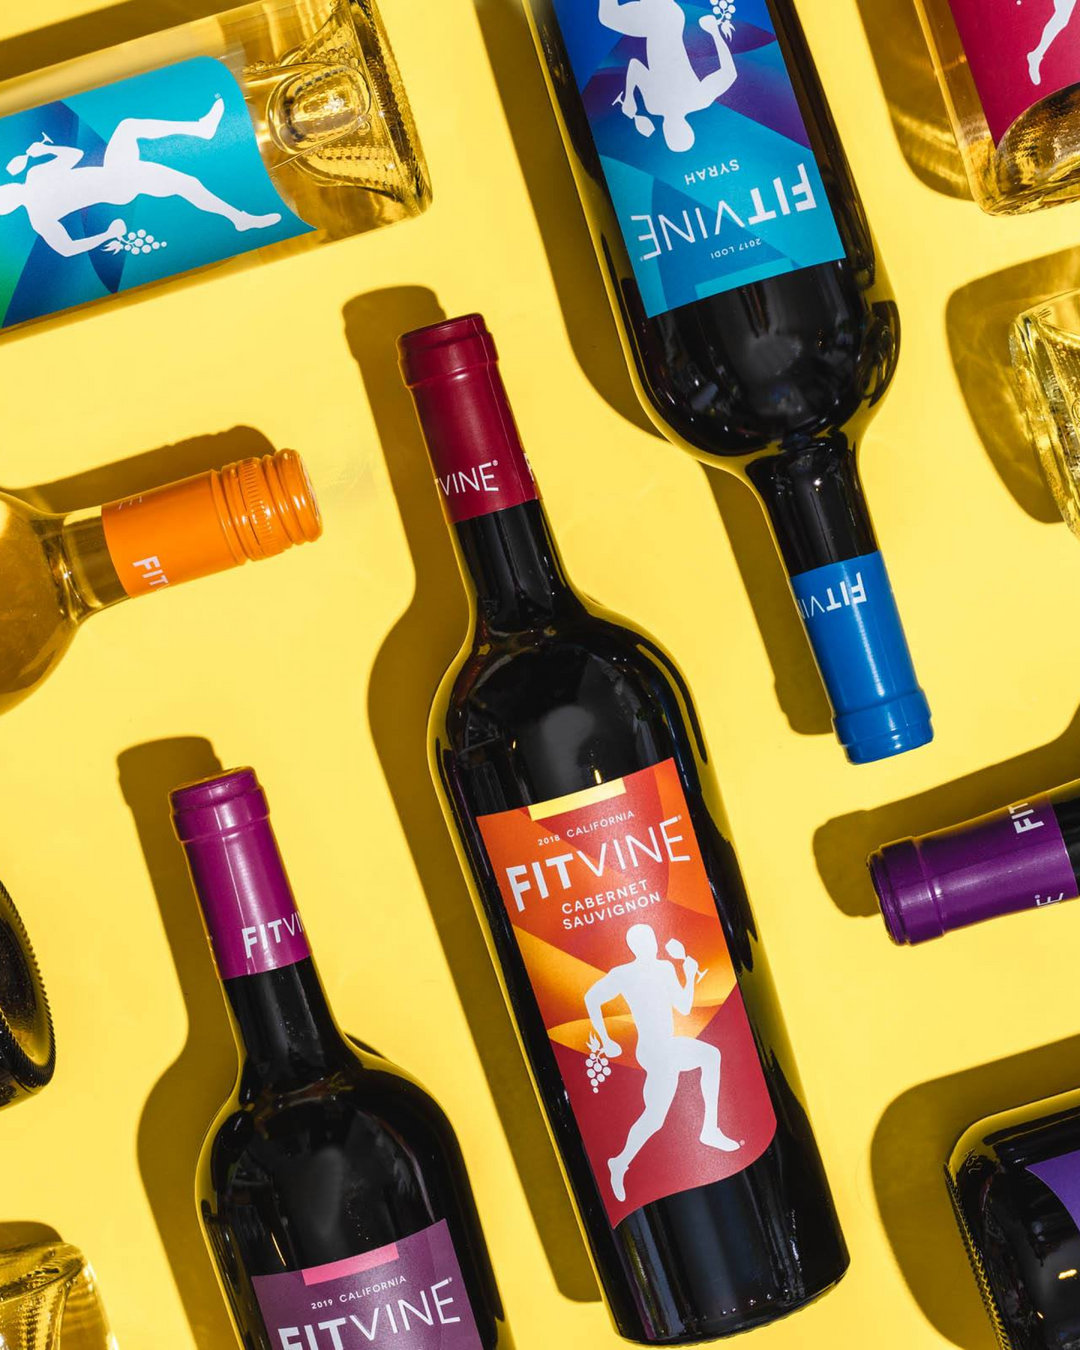 Create a case of Fitvine wines!